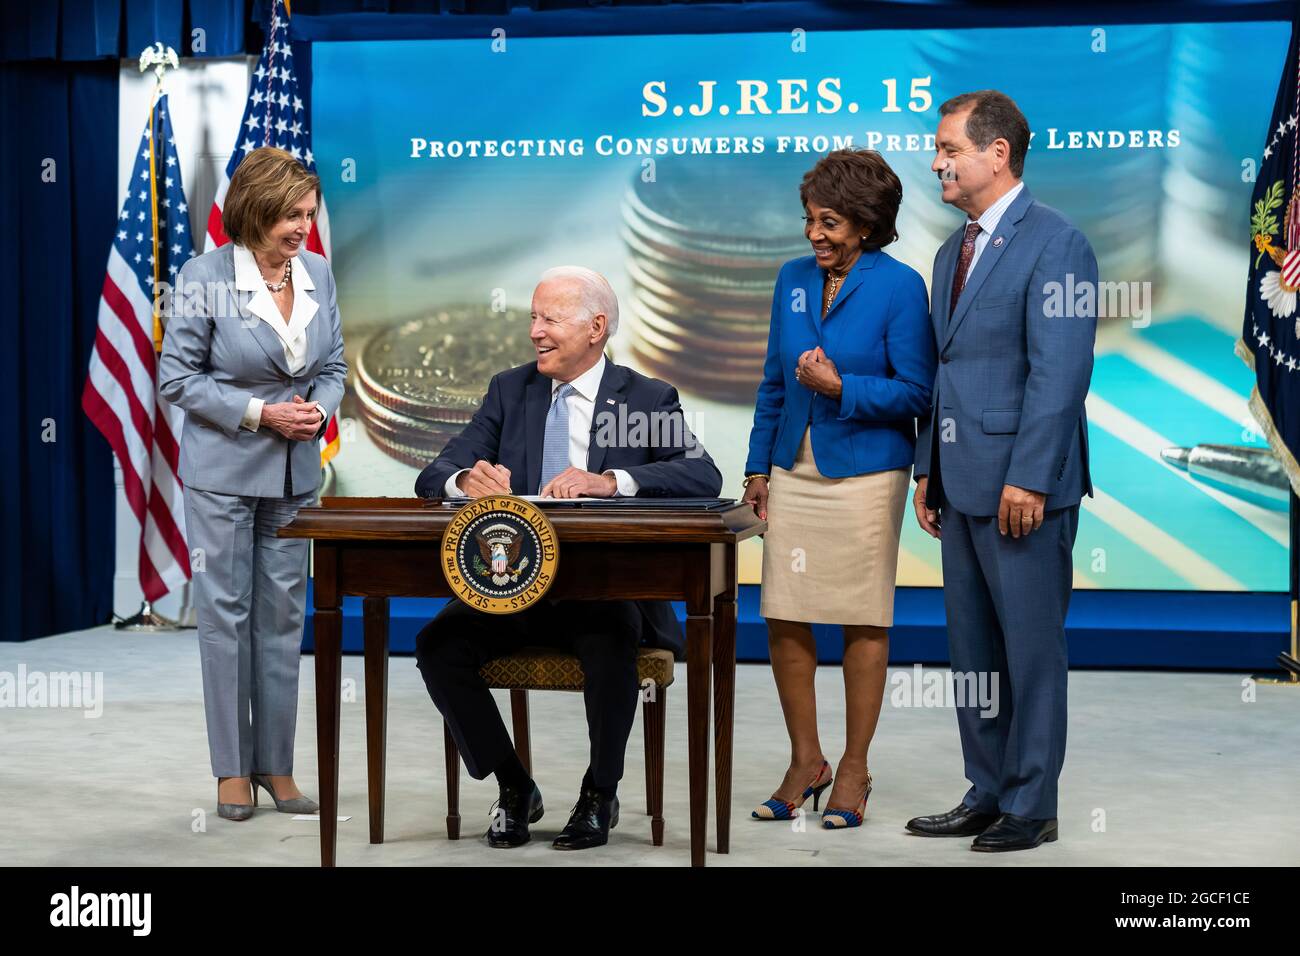 President Joe Biden, joined by House Speaker Nancy Pelosi, D-Calif., Rep. Maxine Waters, D-Calif., and Rep. Jesus “Chuy” Garcia, D-Ill., signs the Methane, Equal Employment Opportunity Commission and True Lender CRA Bills, Wednesday, June 30, 2021, in the South Court Auditorium in the Eisenhower Executive Office Building at the White House. (Official White House Photo by Adam Schultz) Stock Photo